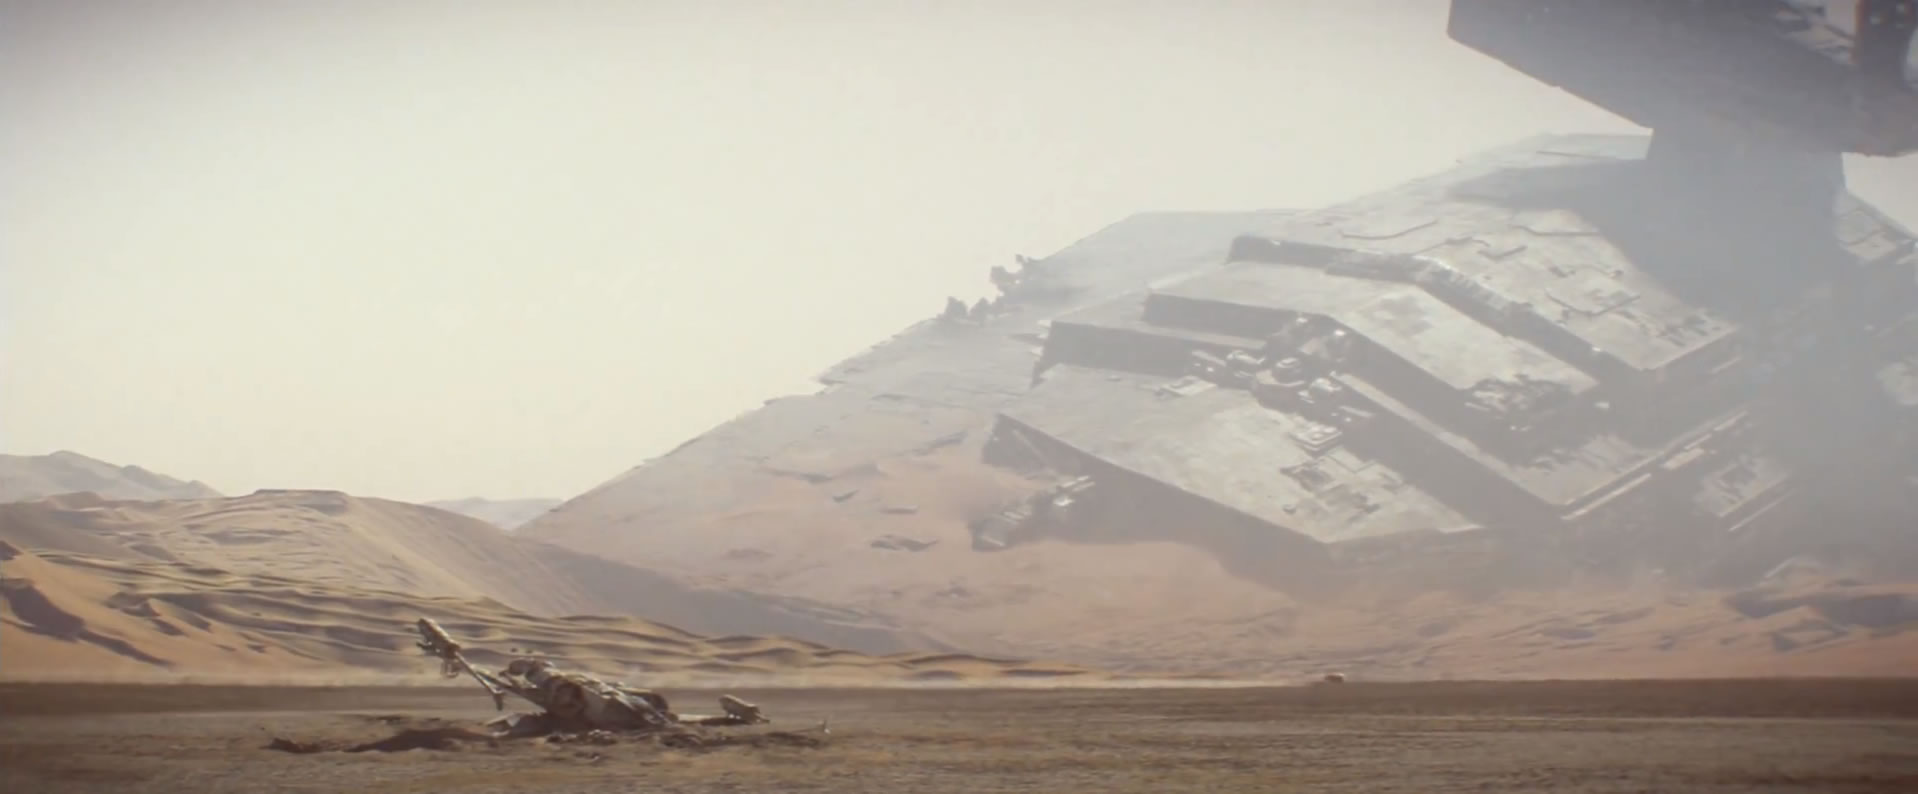 Remember Star Wars: Aftermath? It's The First Of A Trilogy Leading Toward The Force Awakens.